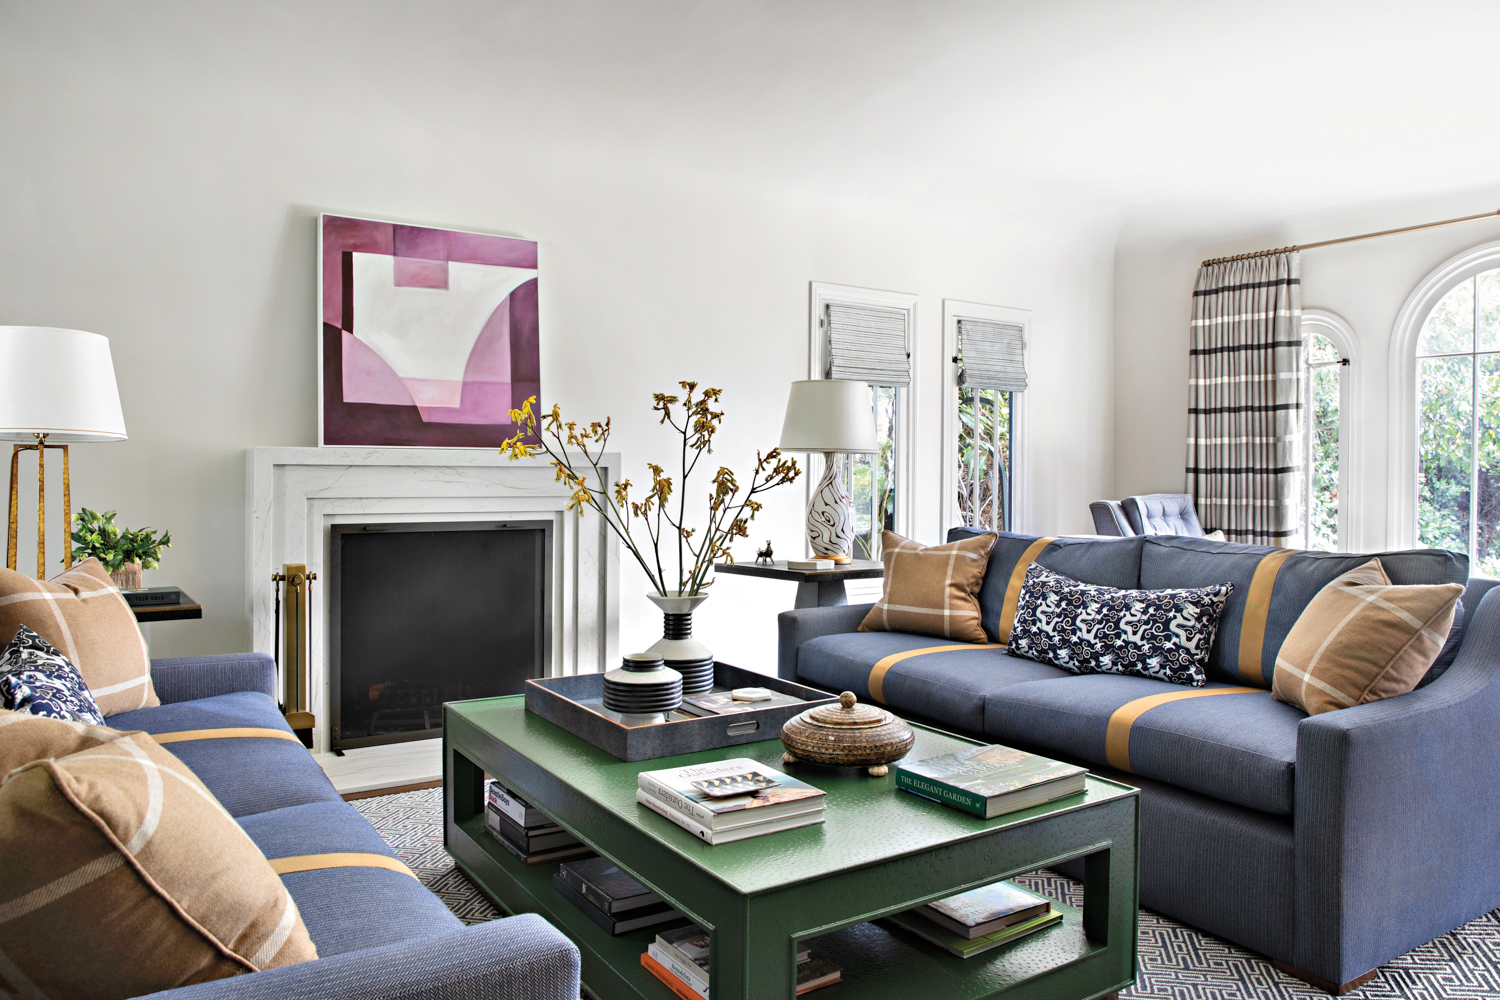 living room with twin gray fabric sofas, a green coffee table, a fireplace and white mantle with an abstract painting hung above